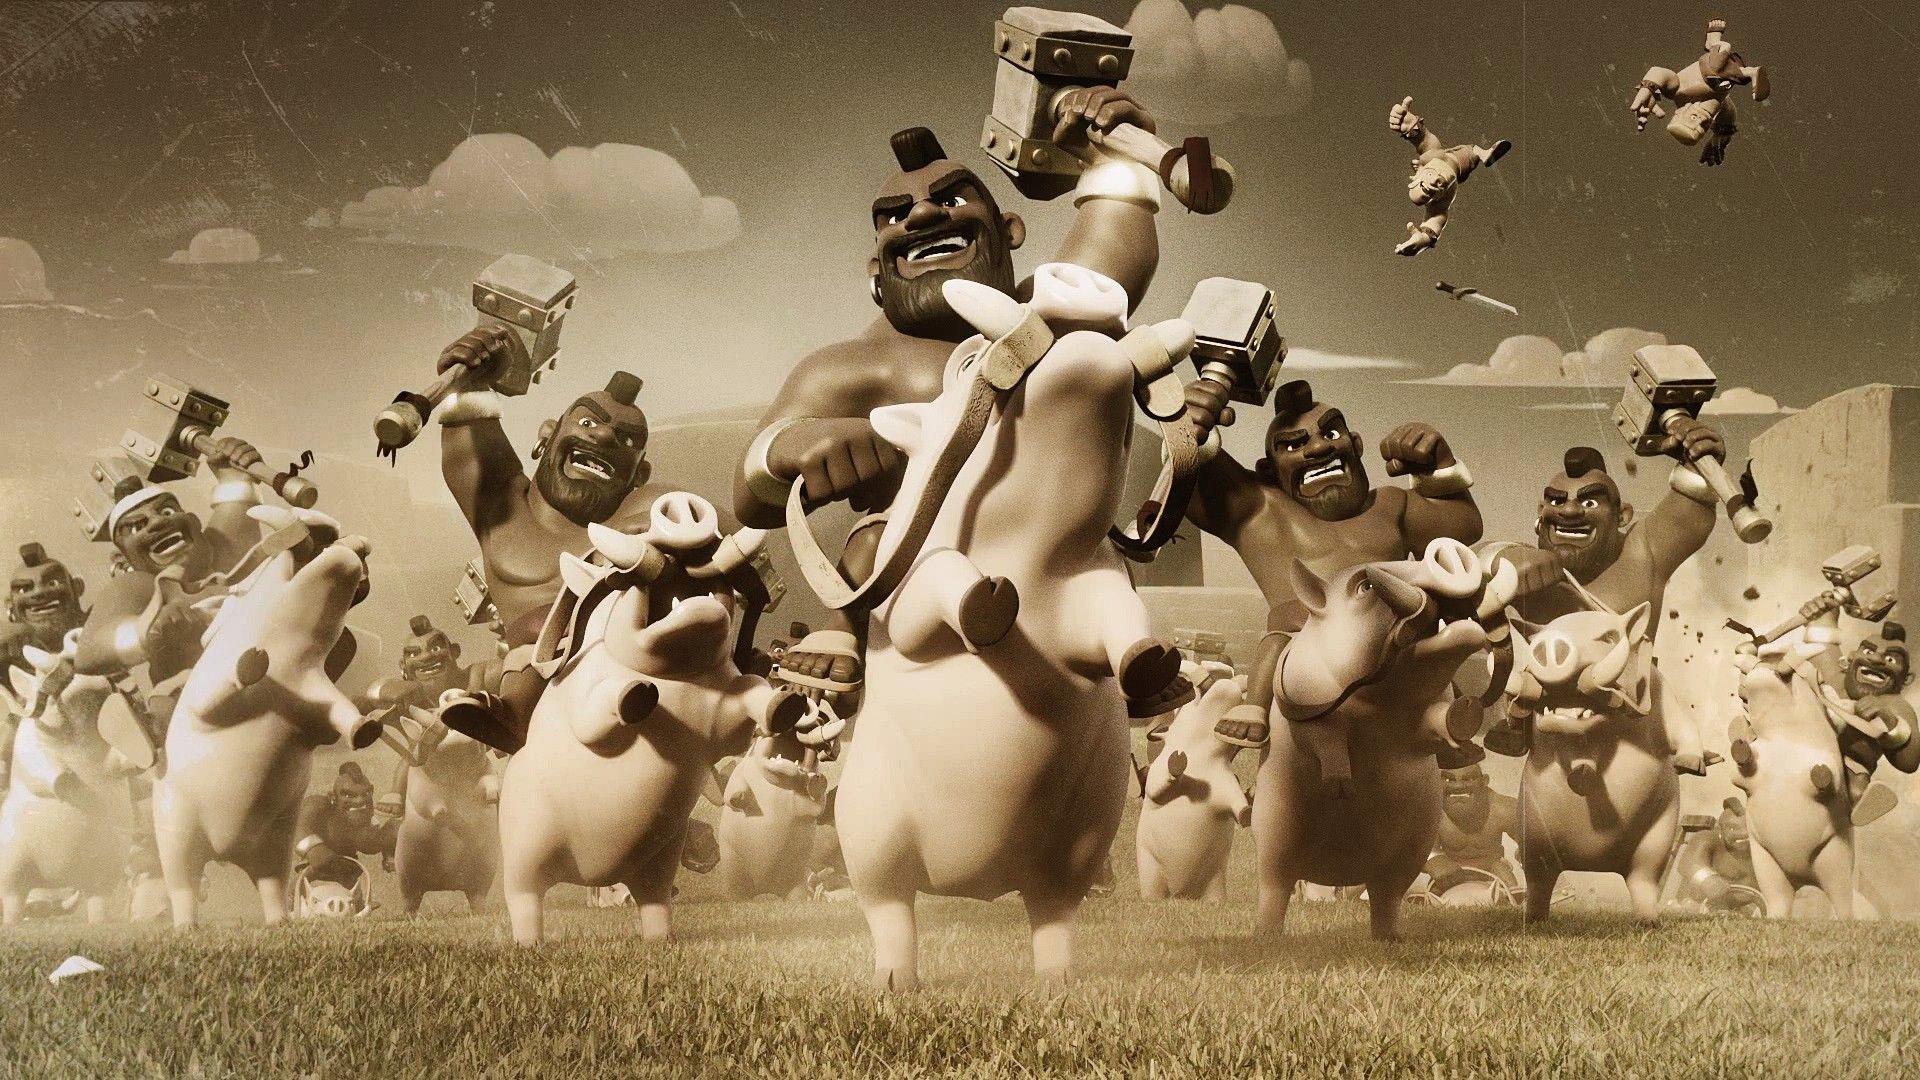 Clash Of Clans Wallpaper HD Background, Image, Pics, Photo